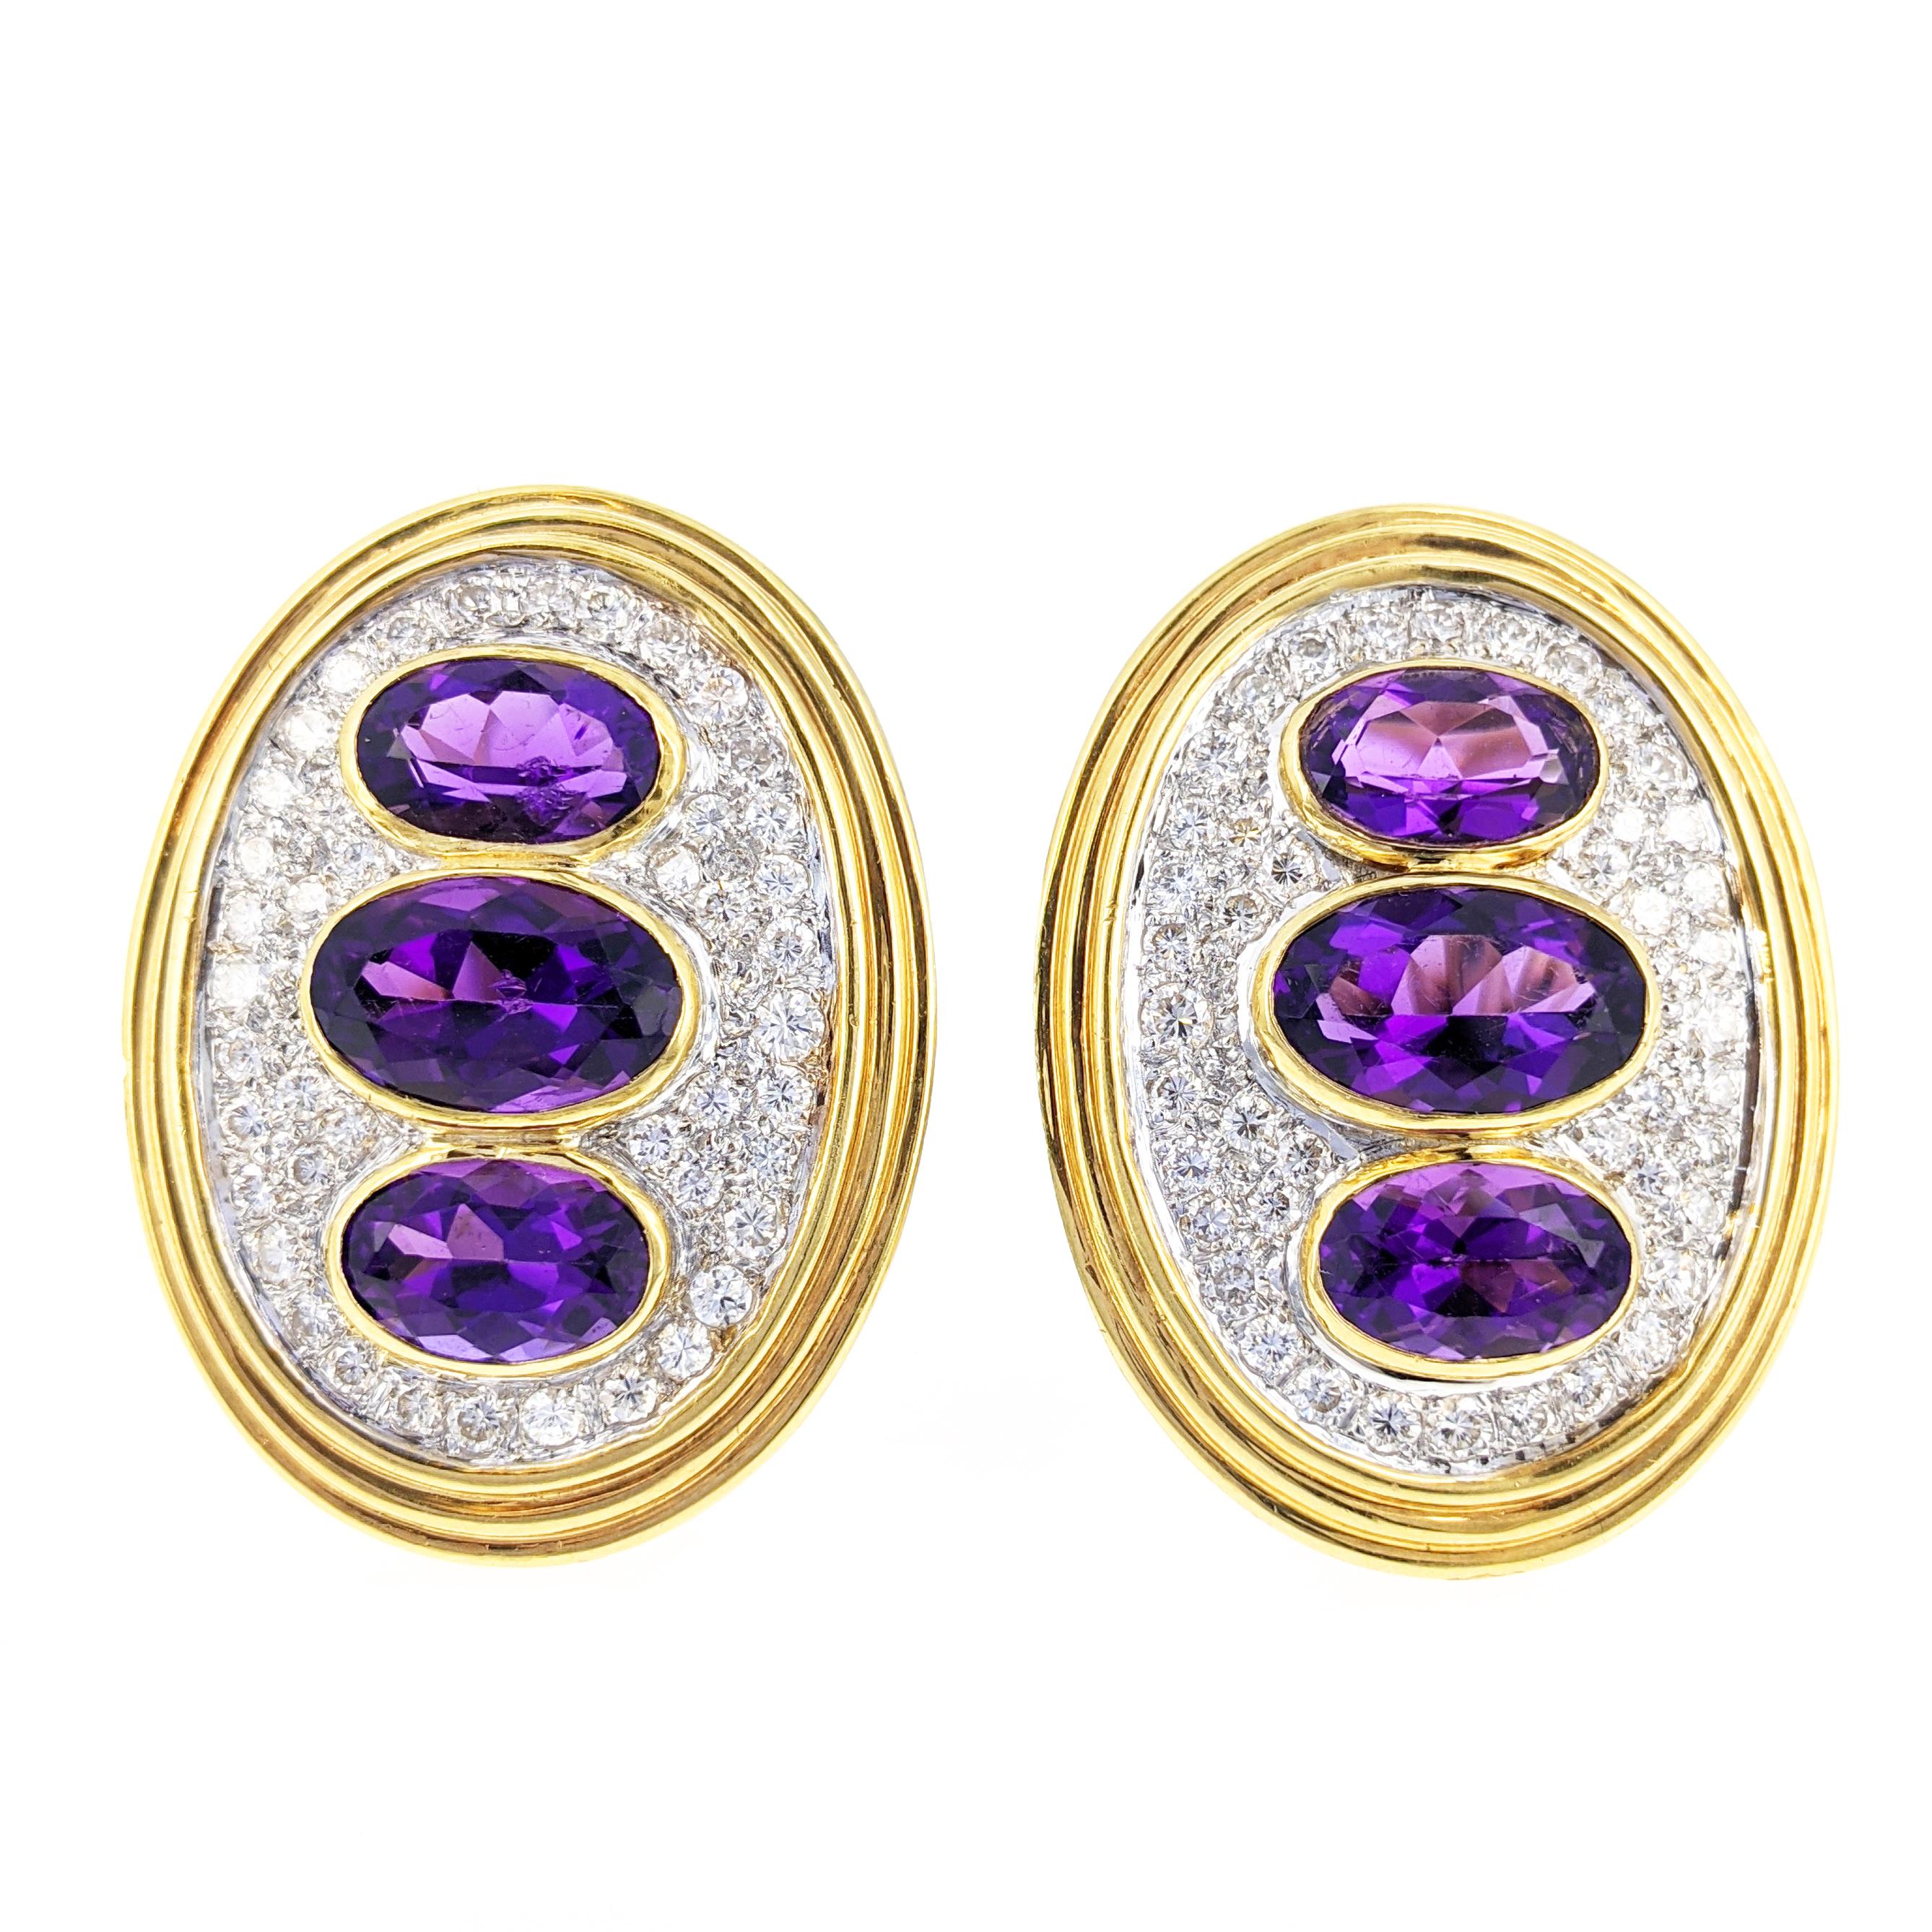 This pair of beautiful clip earrings features six oval-shaped purple amethysts that are well matched. They are richly saturated and contrast nicely with the yellow gold bezel setting. The amethysts are surrounded by pave-set round-cut diamonds